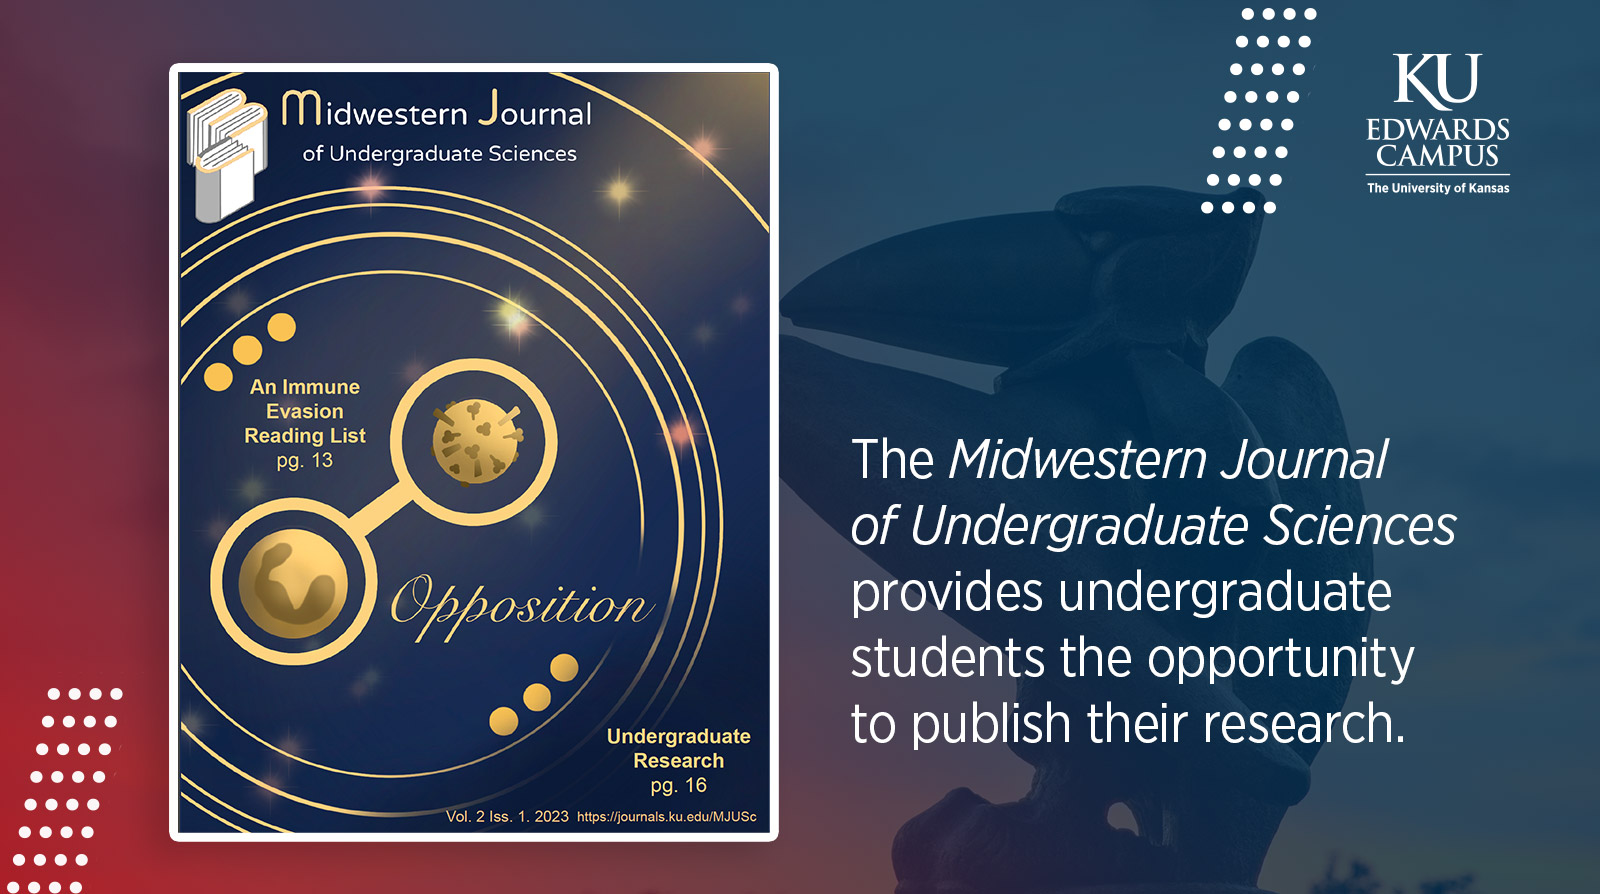 Midwestern Journal Magazine on a blue colored background with text The Midwestern Journal of Undergraduate Sciences provides undergraduate students the opportunity to publish their research.